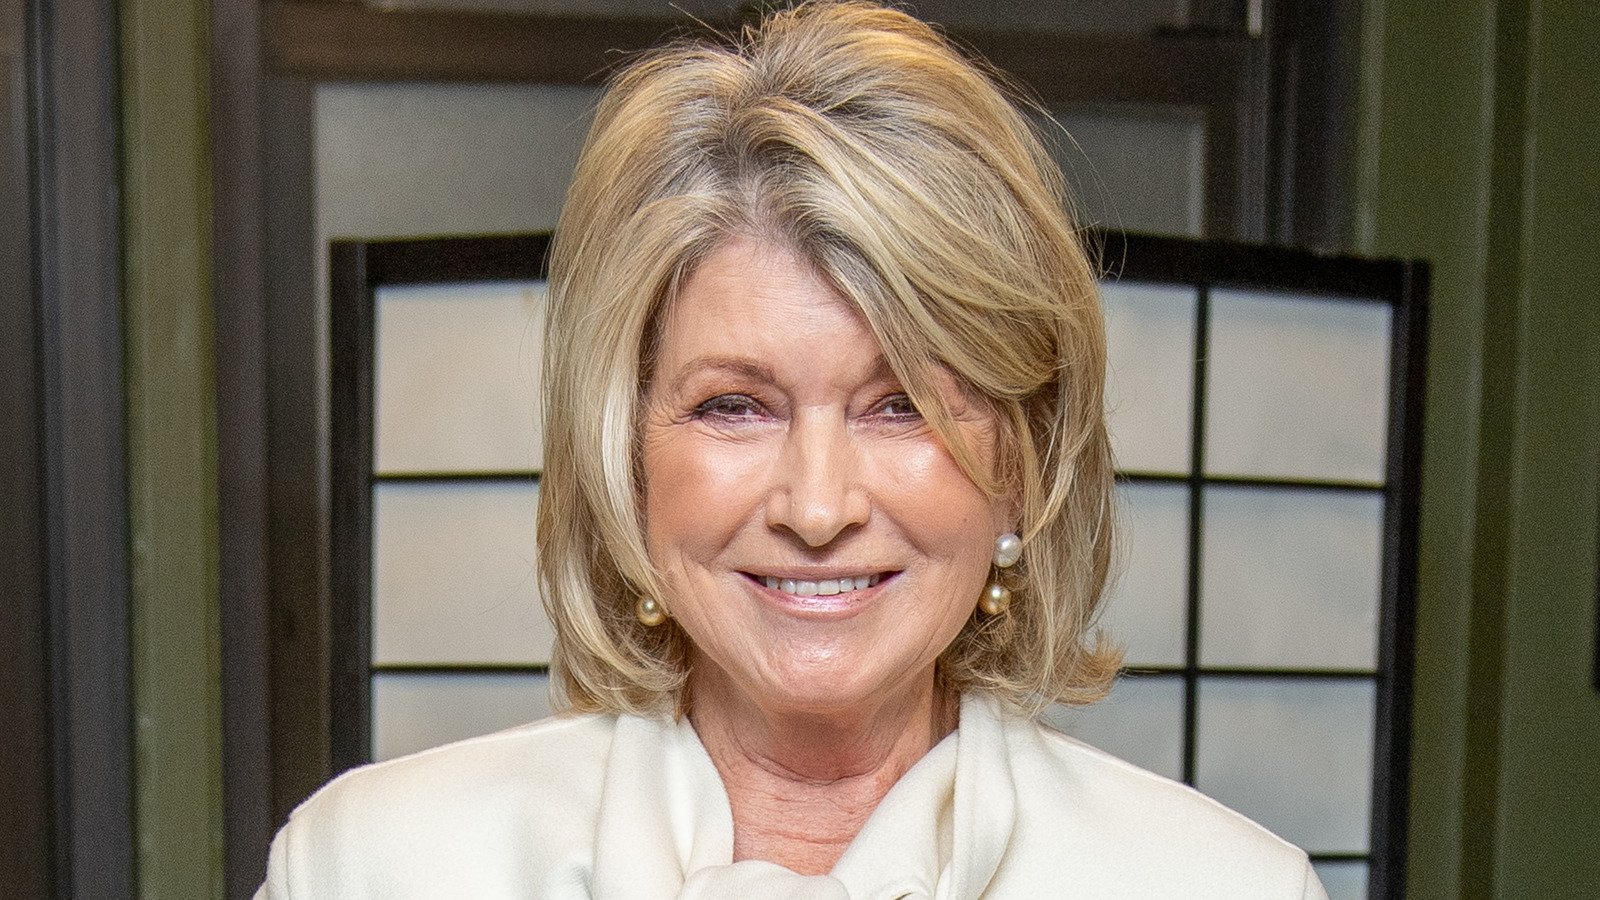 Martha Stewart is a domestic icon, so when she releases her favorite recipe...